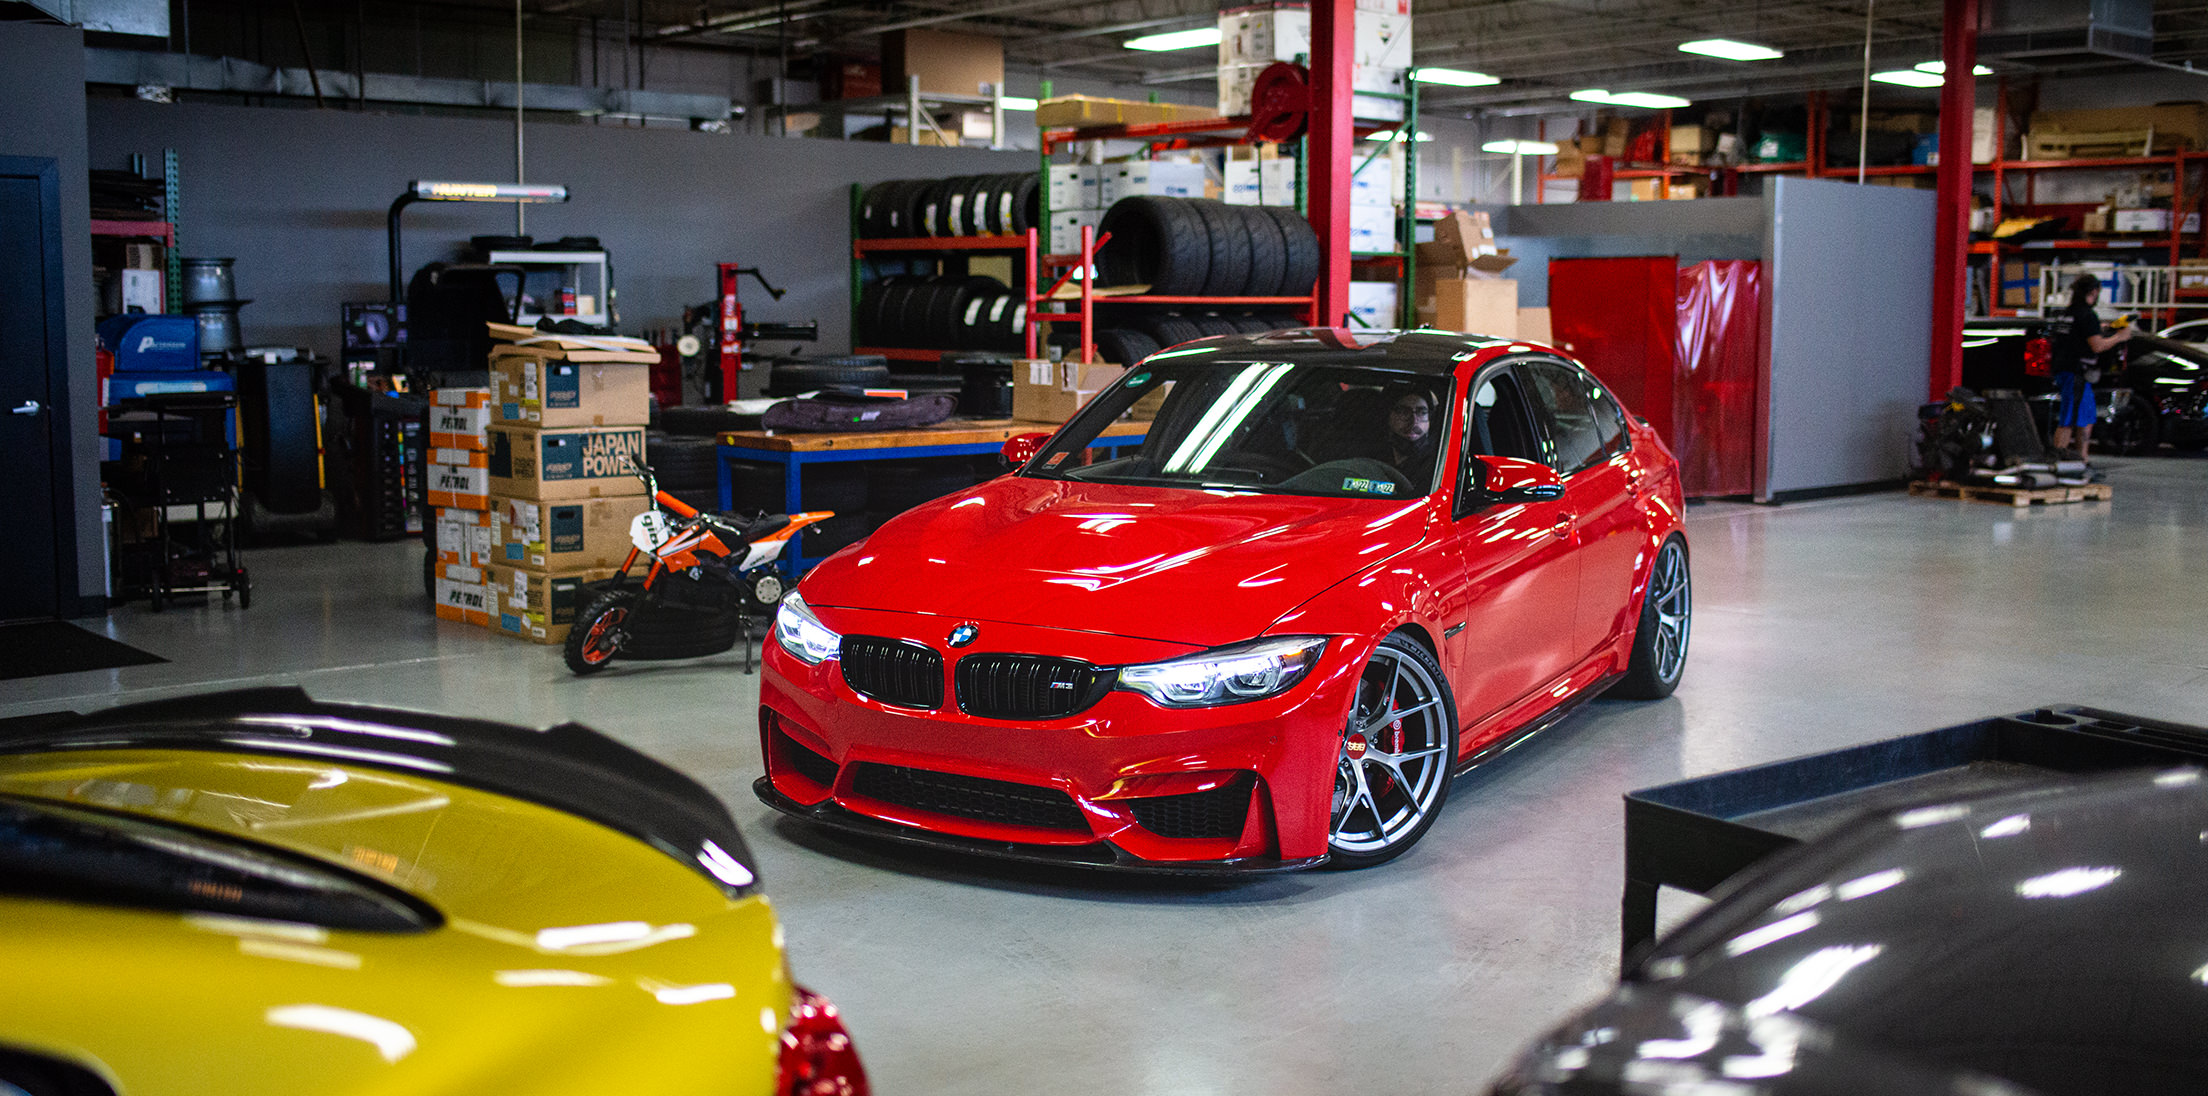 Until conversion to F80 M3 - tuning on the BMW 3er F30